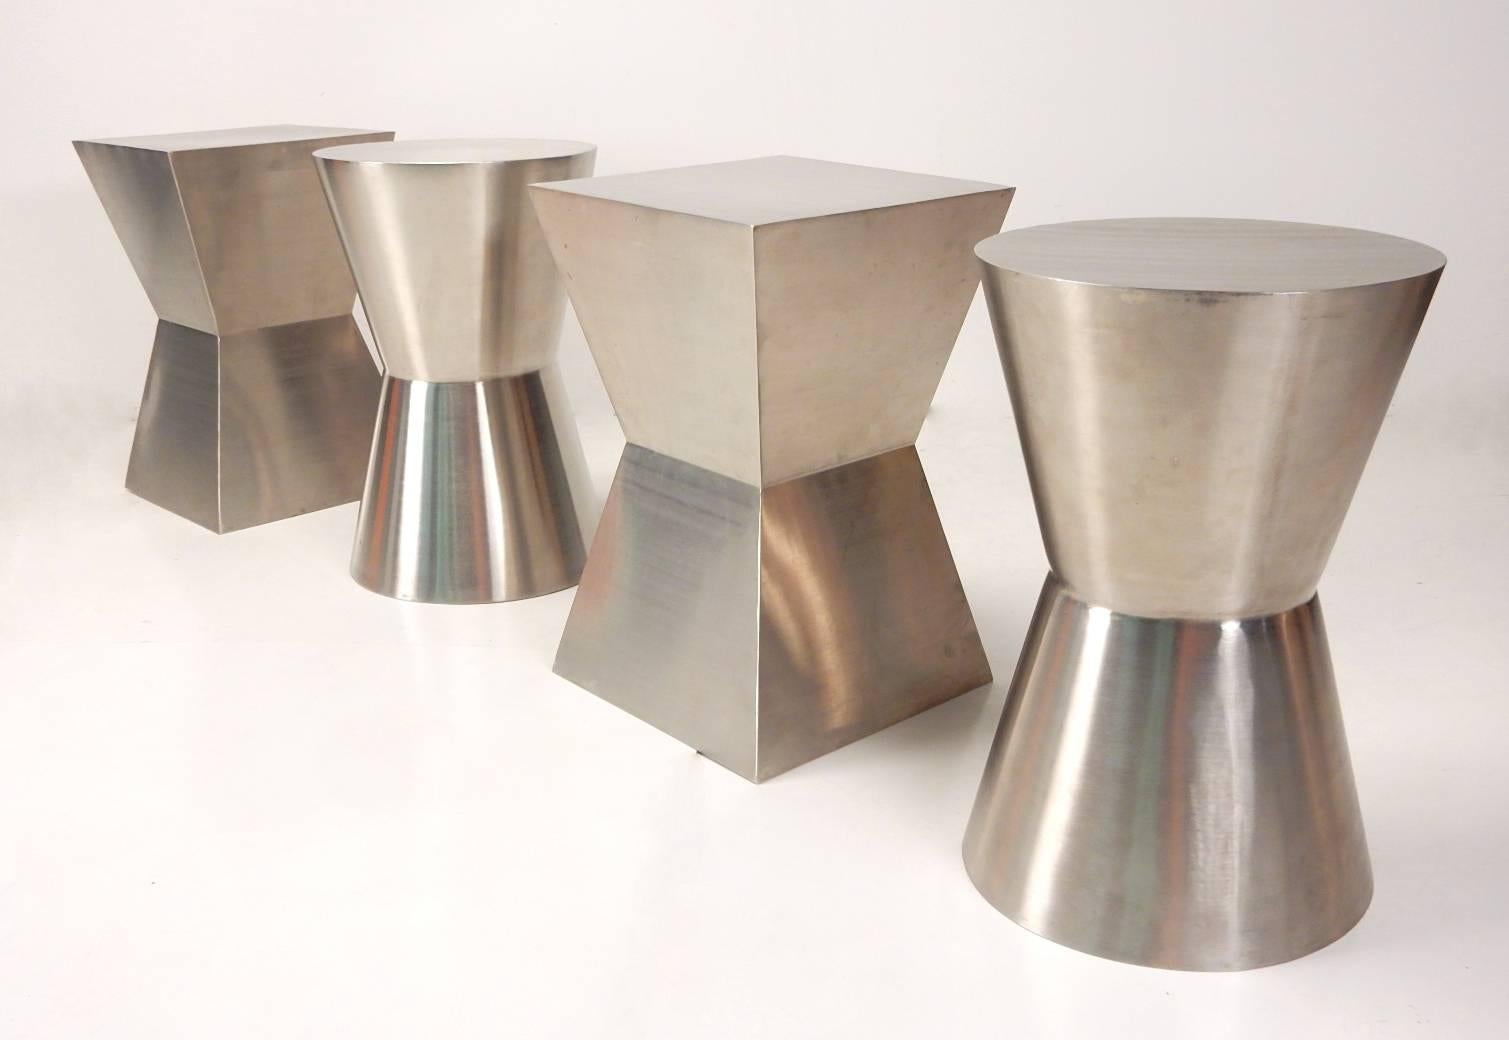 Set of four custom-made seamless stainless steel tables or stools.
Heavy well-crafted and unique.
Two rectangular and two hourglass shapes.